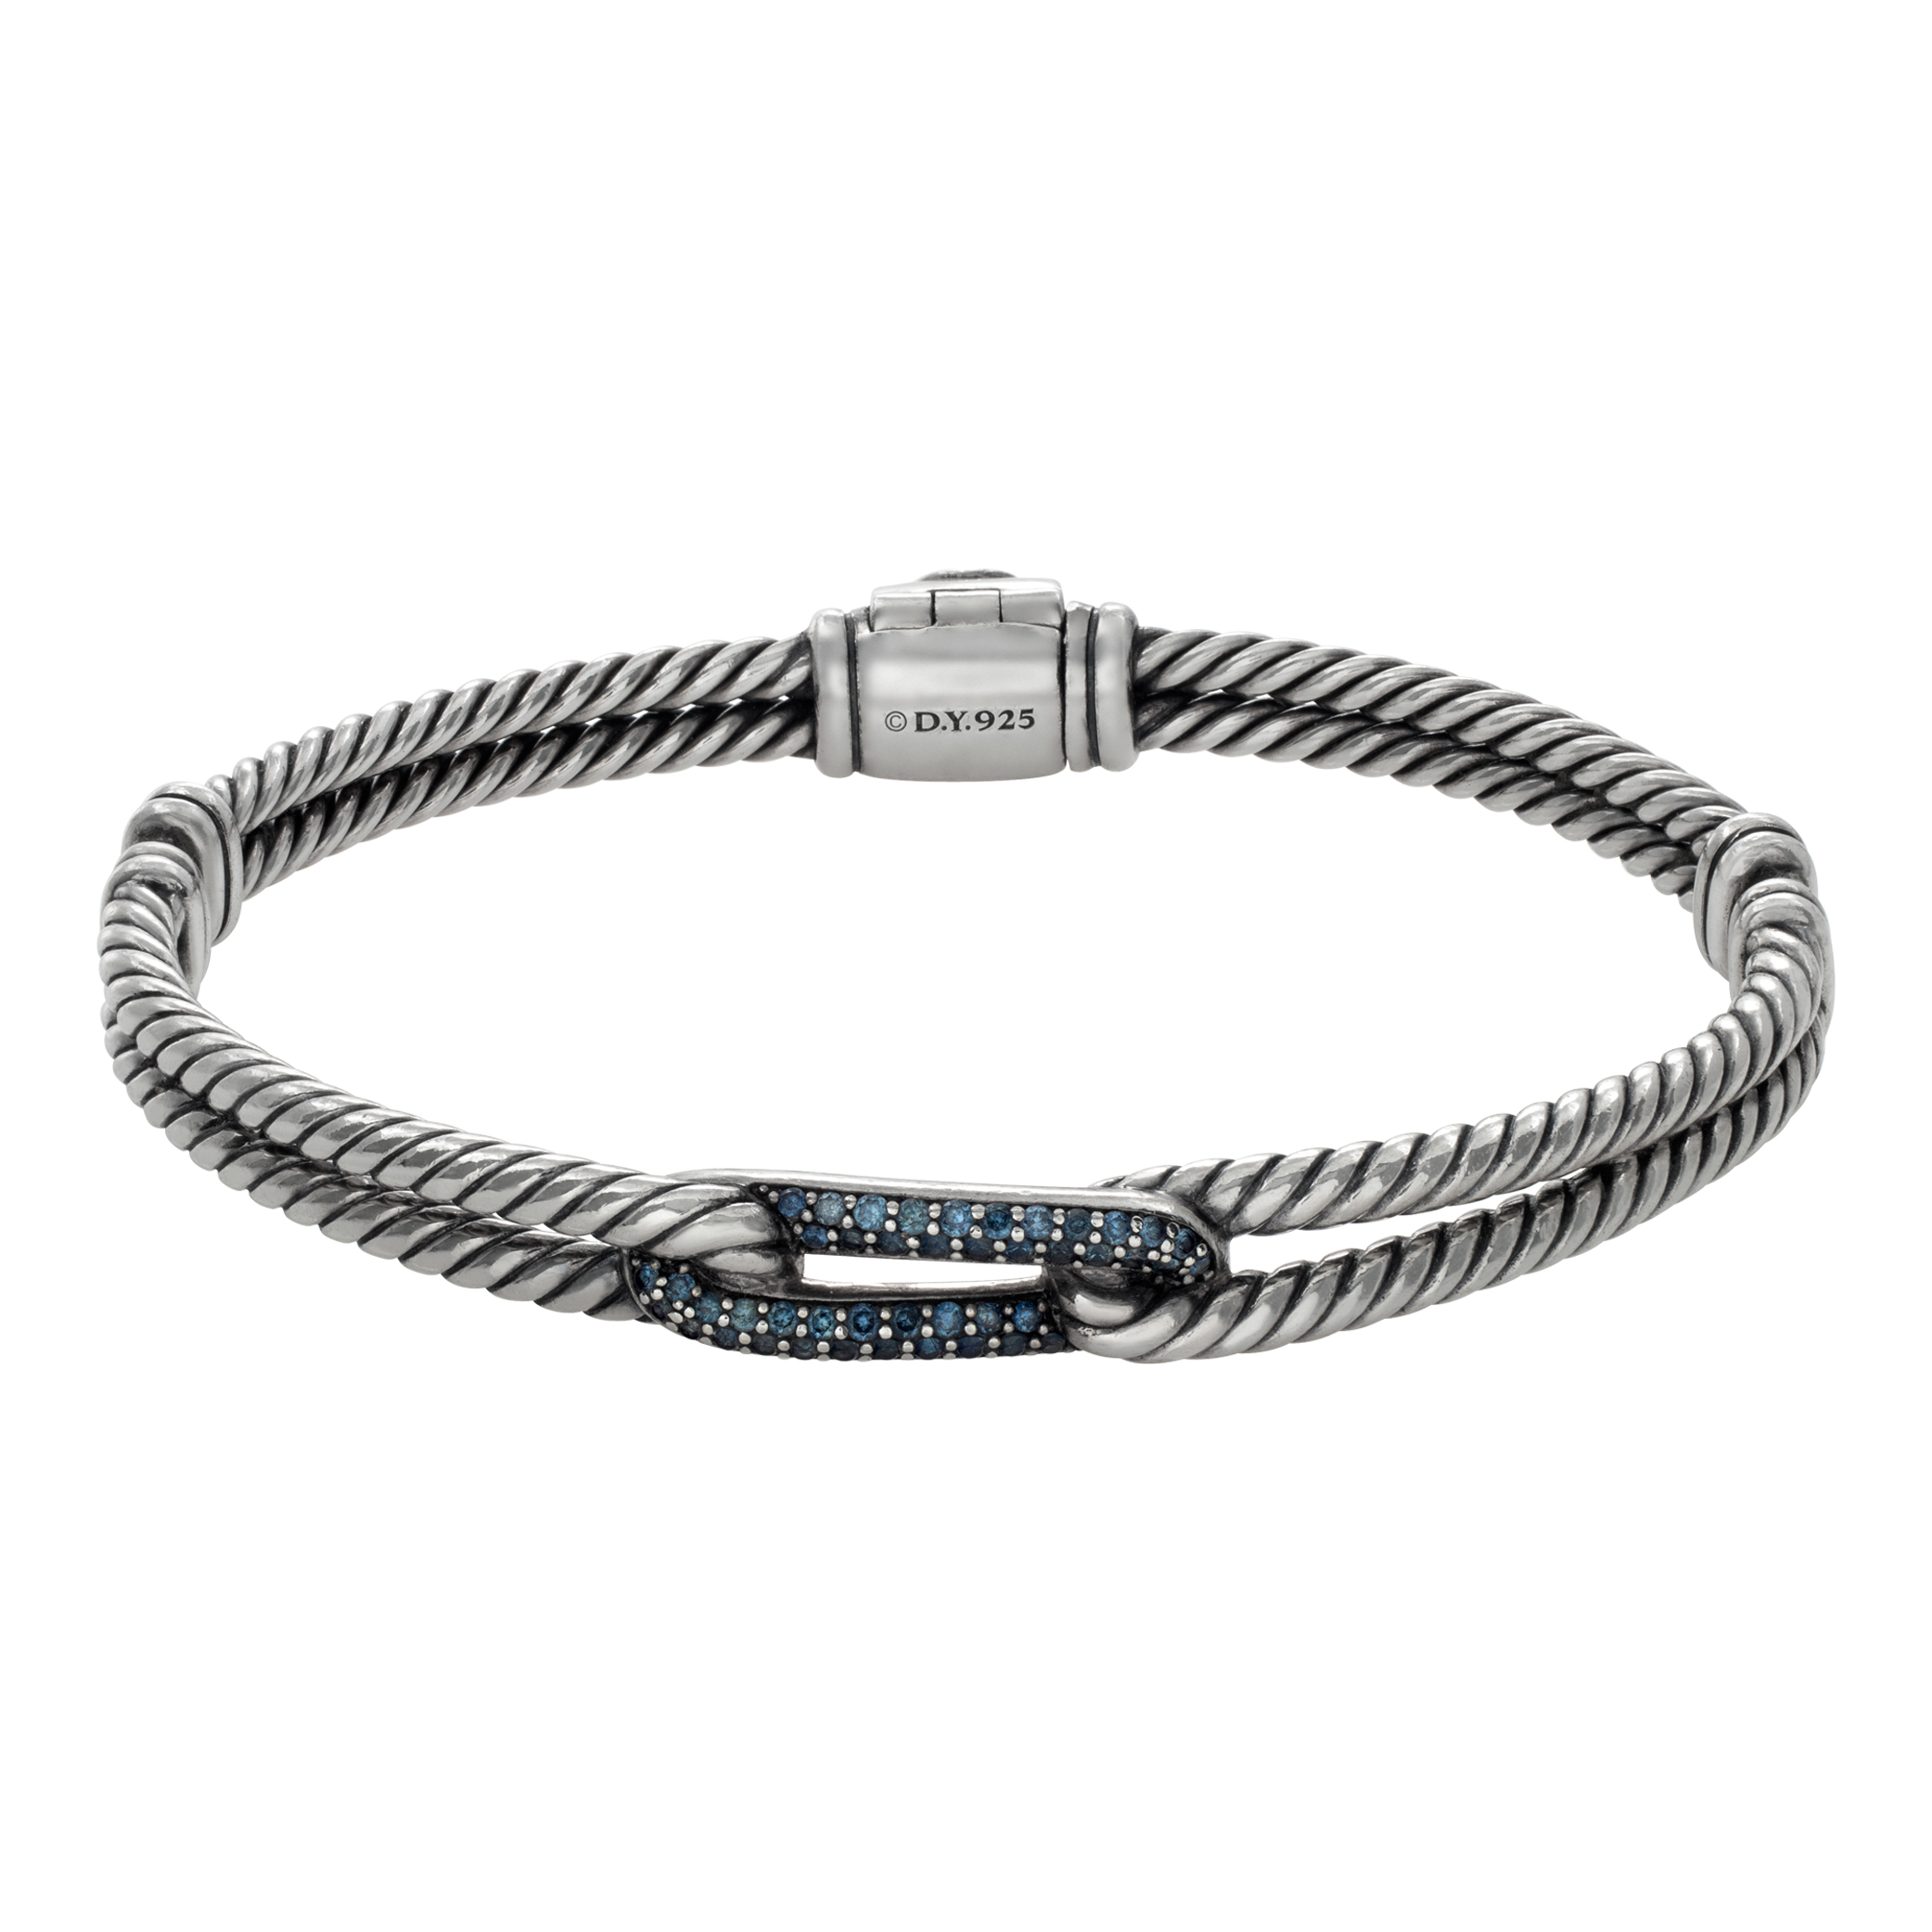 David Yurman Double Row Cable bracelet in sterling silver with sapphire accents